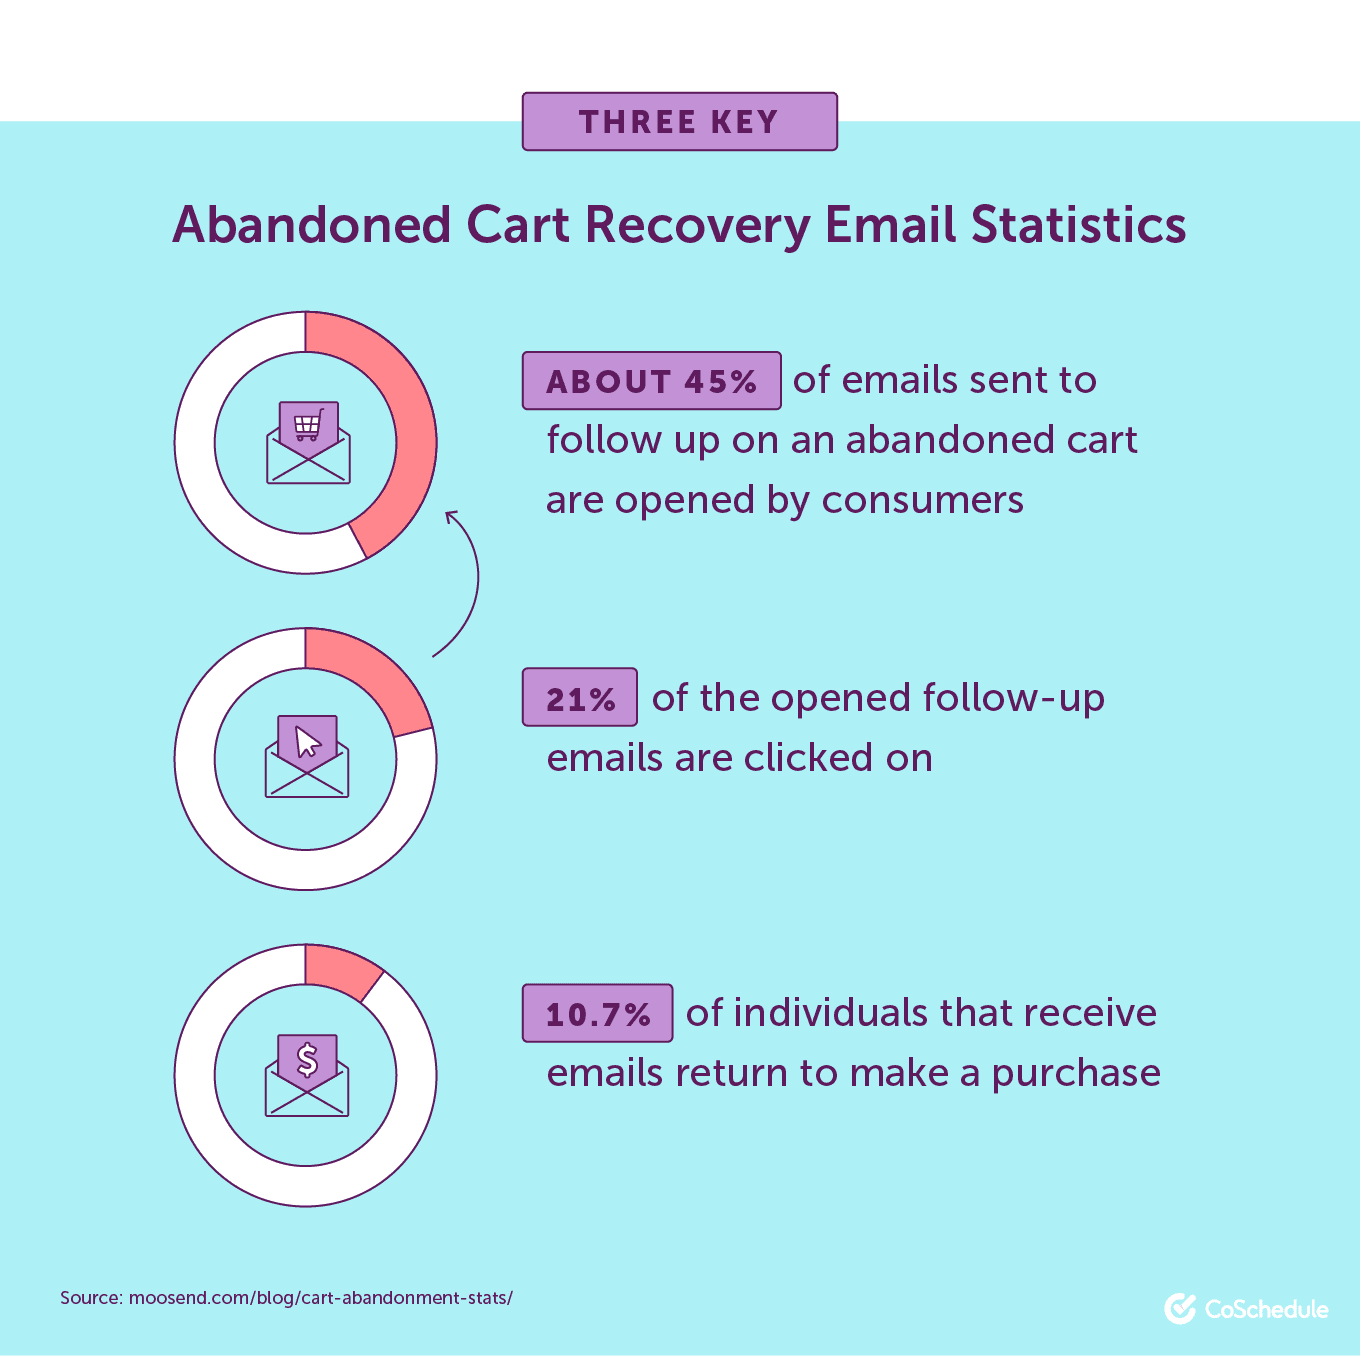 Three Key Abandoned Cart Recovery Email Statistics